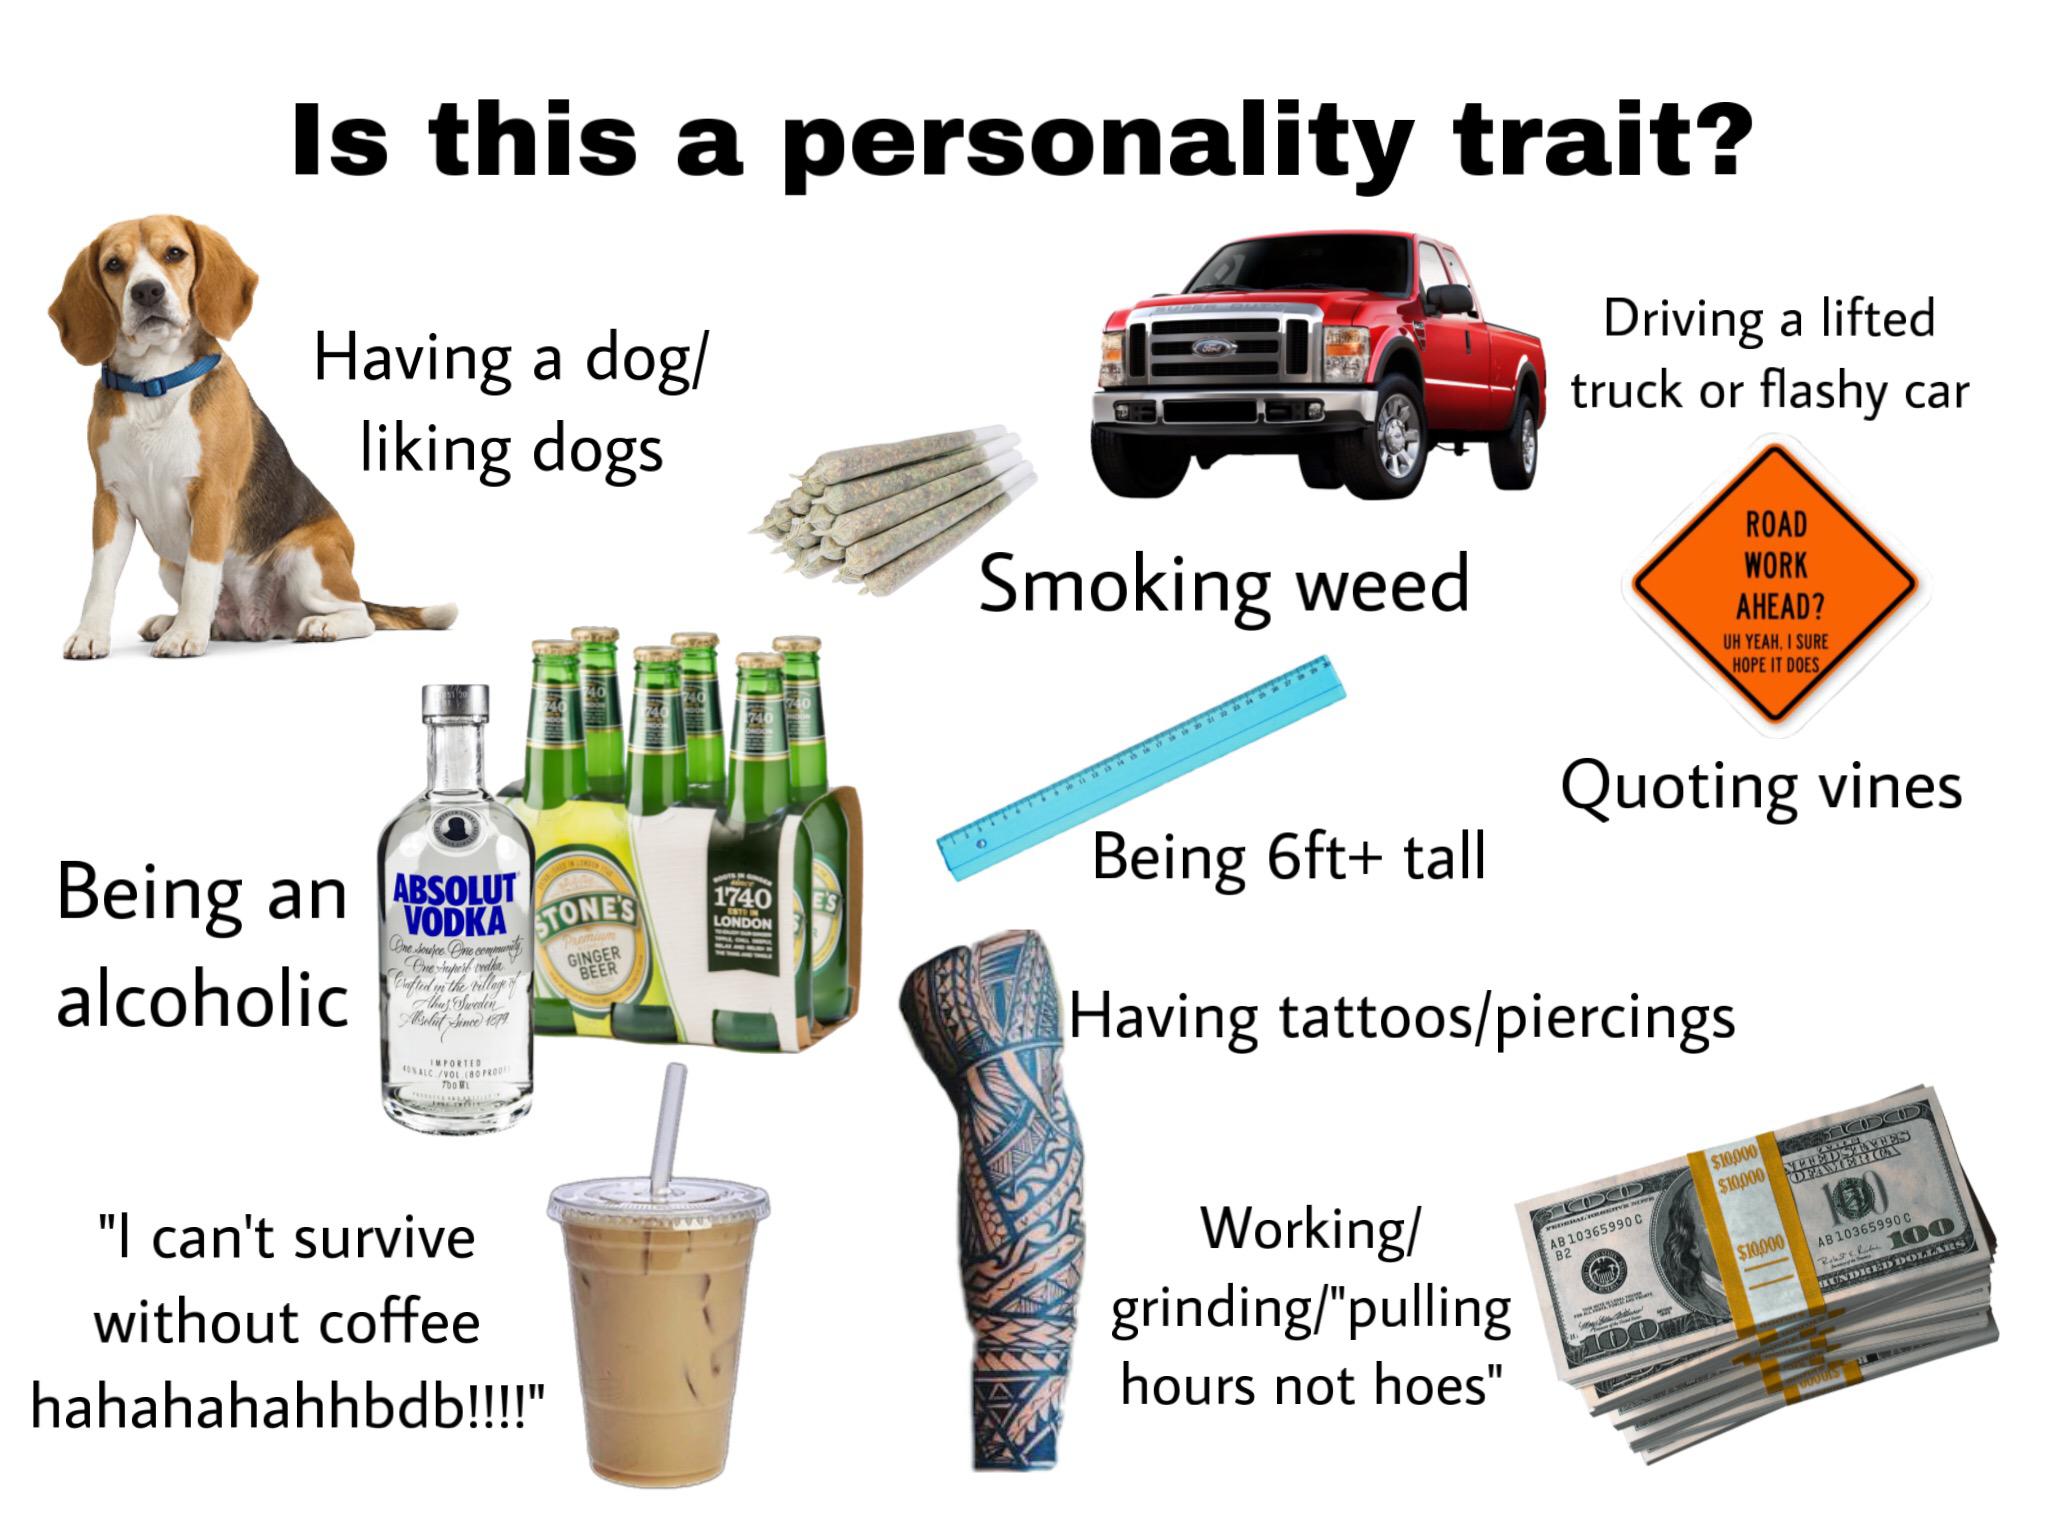 personality trait meme - Is this a personality trait? Having a dog liking dogs Driving a lifted truck or flashy car Smoking weed Road Work Ahead? Uh Yeah. I Sure Hope It Does Quoting vines Being 6ft tall Absolut 1740 London Vodka Tone'S Being an Absolat T